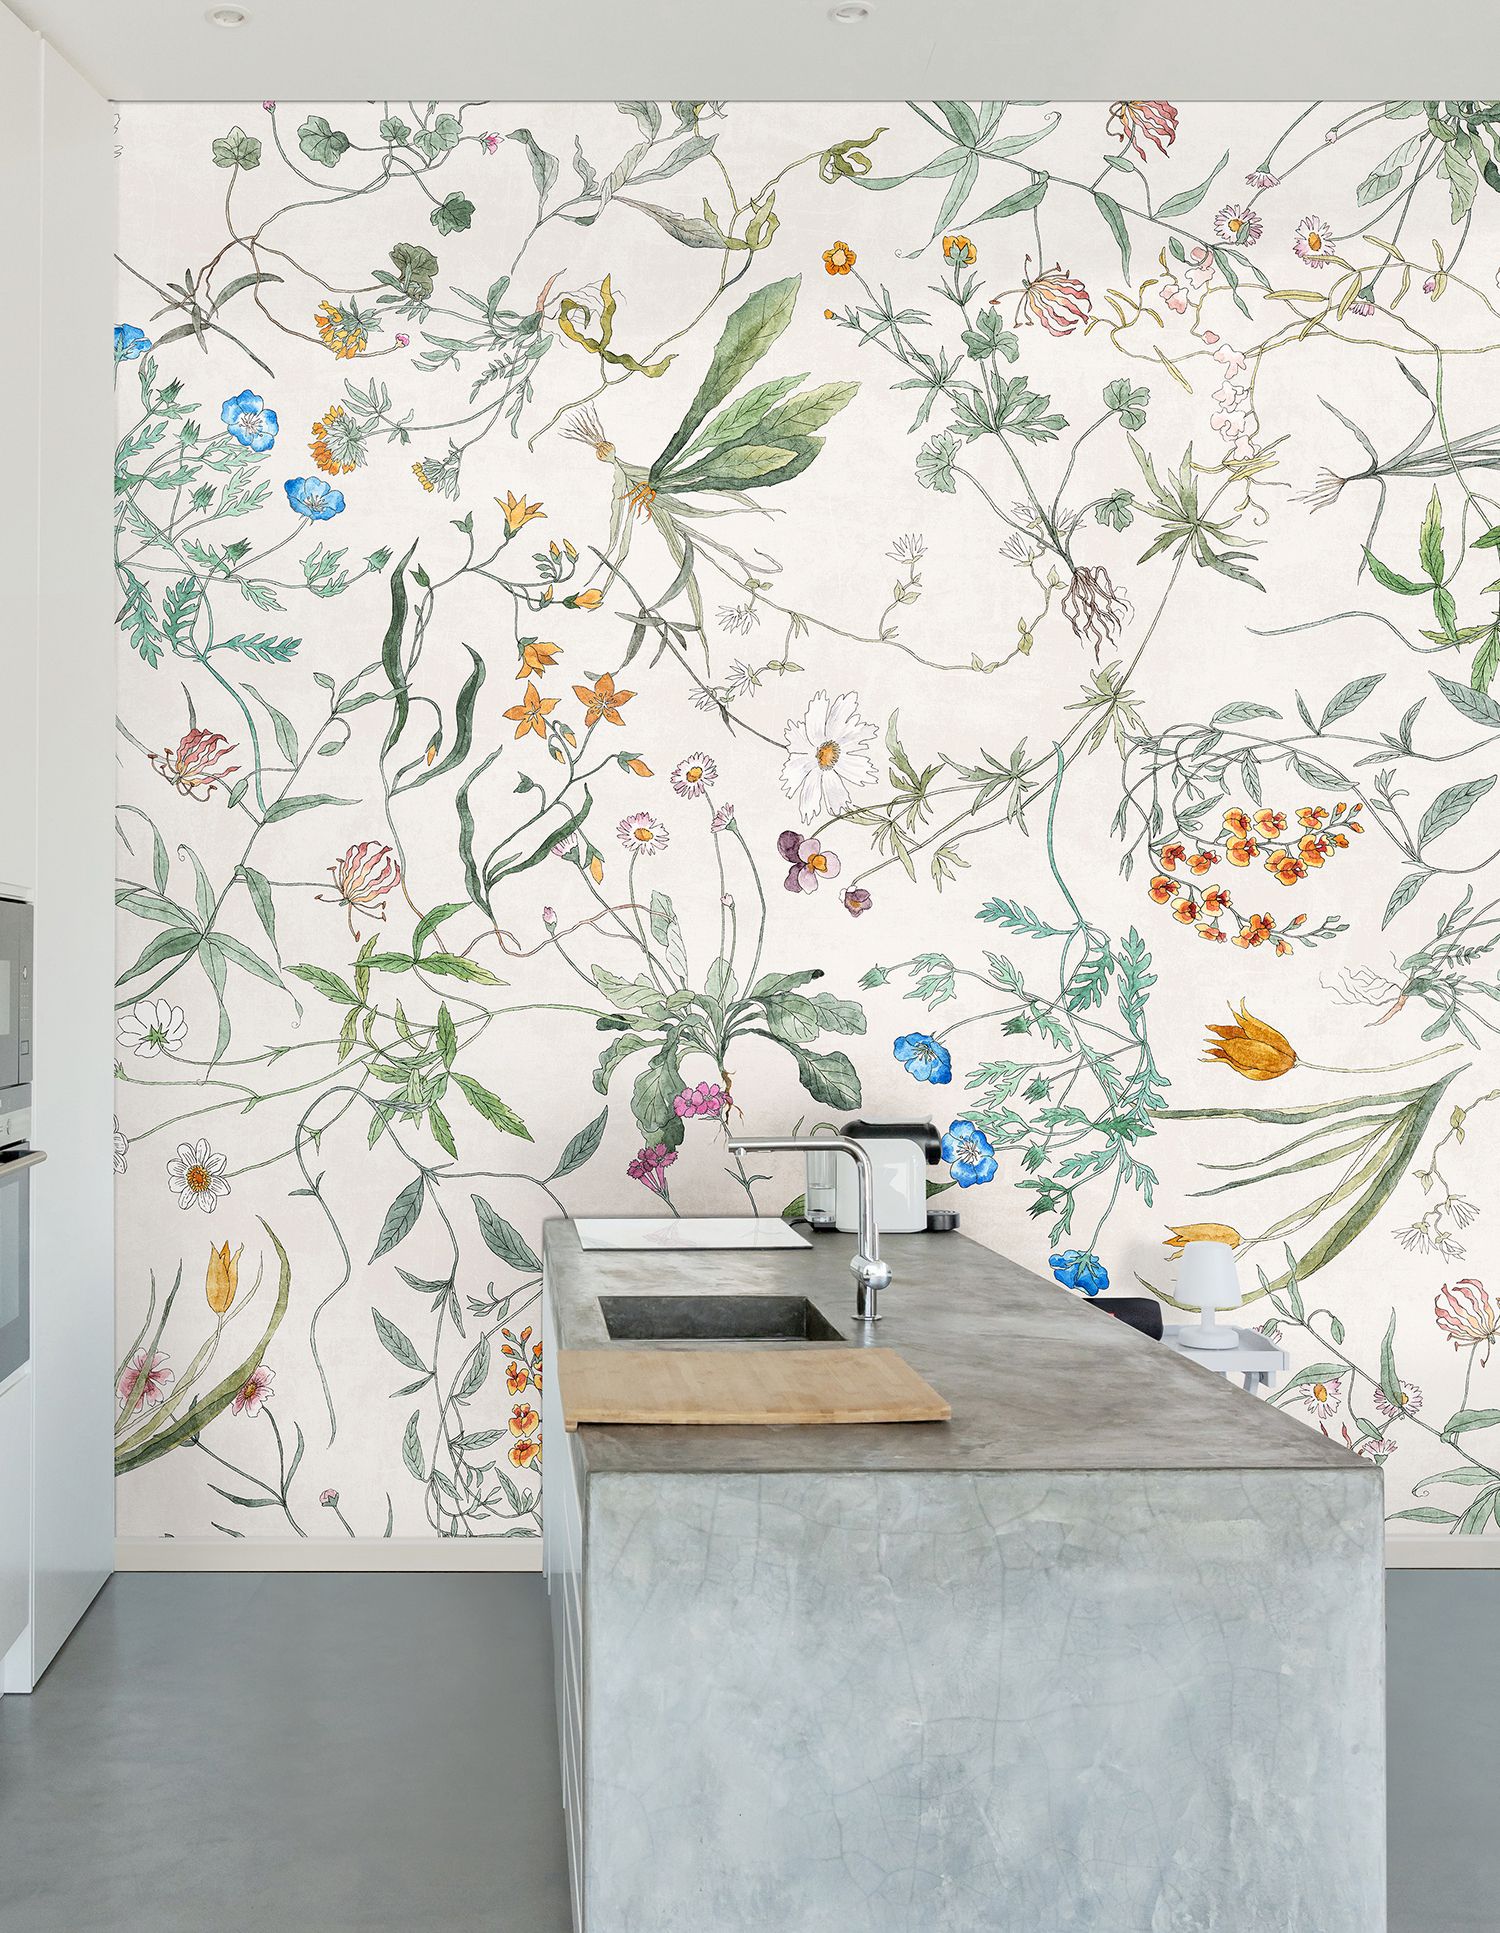 https://hips.hearstapps.com/hmg-prod/images/cocina-papel-pared-wall-pepper-flores-1618310624.jpg